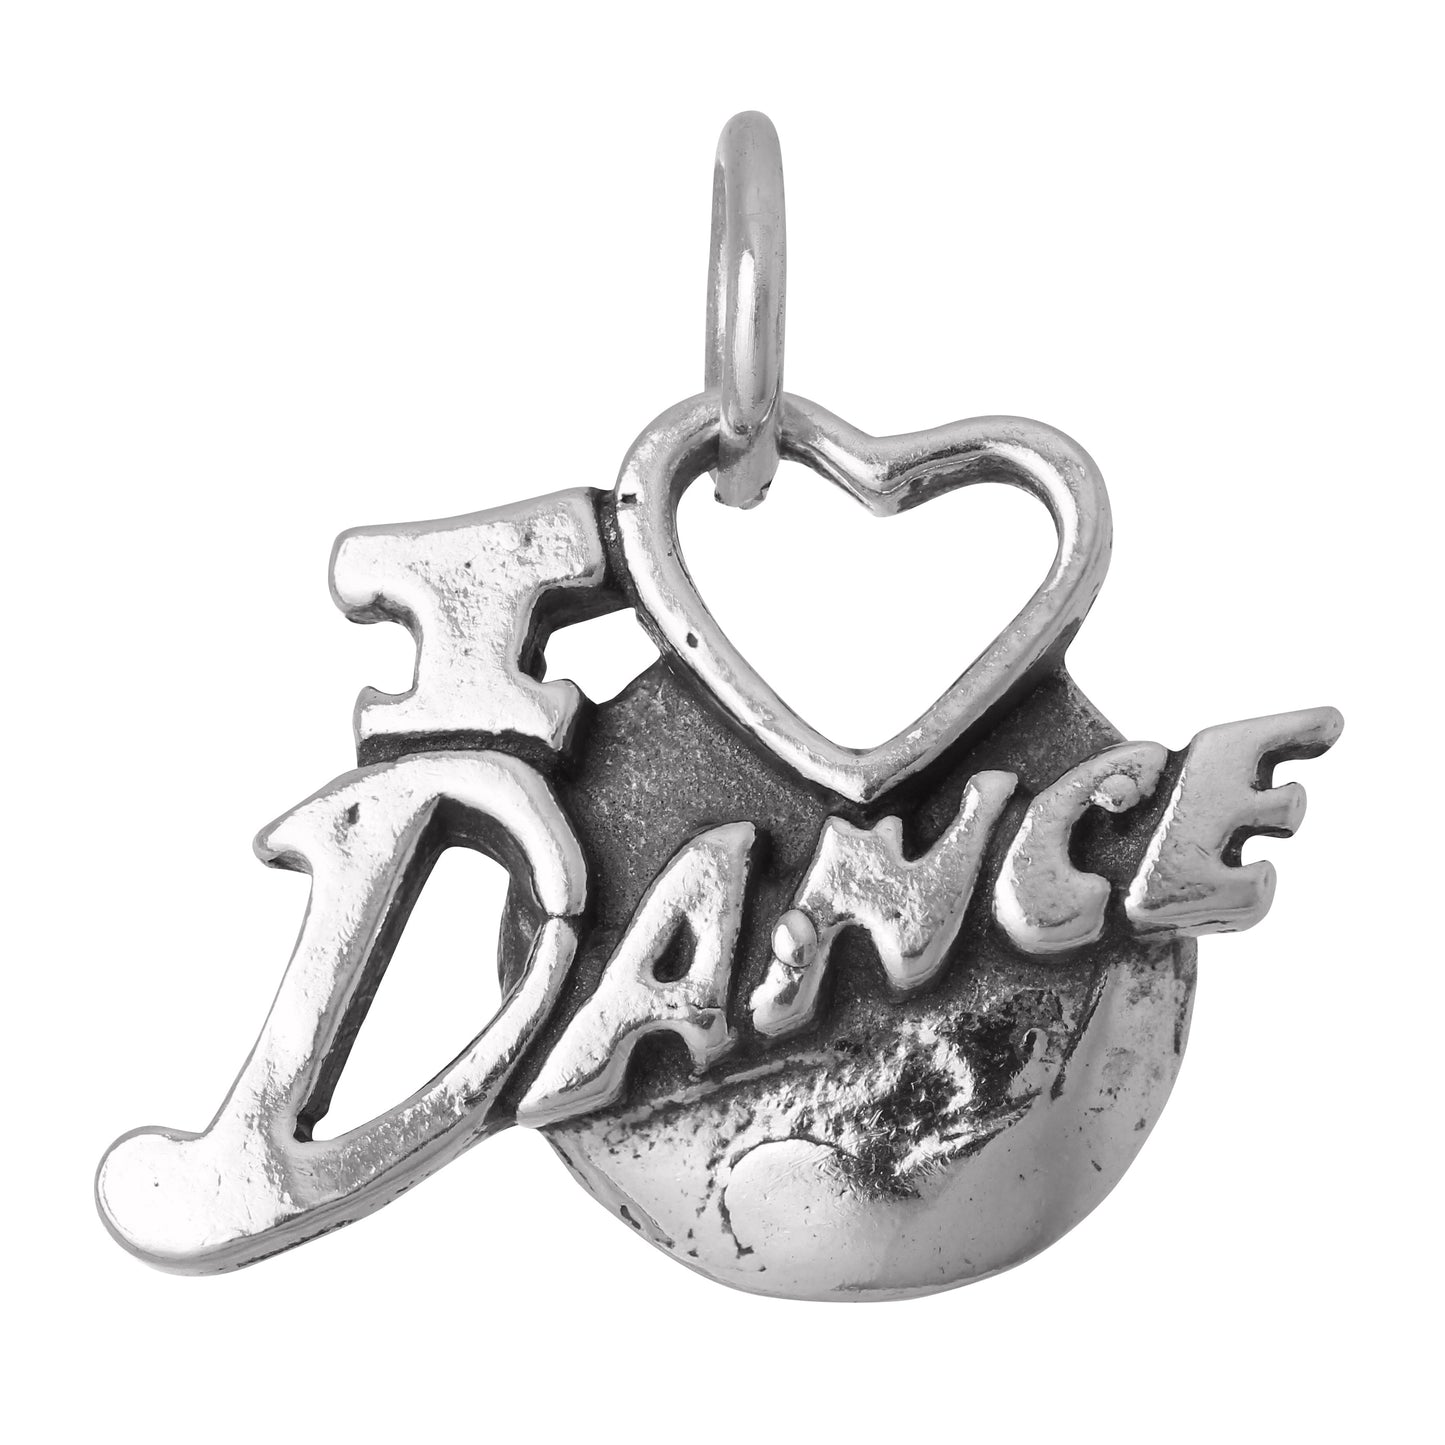 Sterling Silver I Heart to Dance Charm